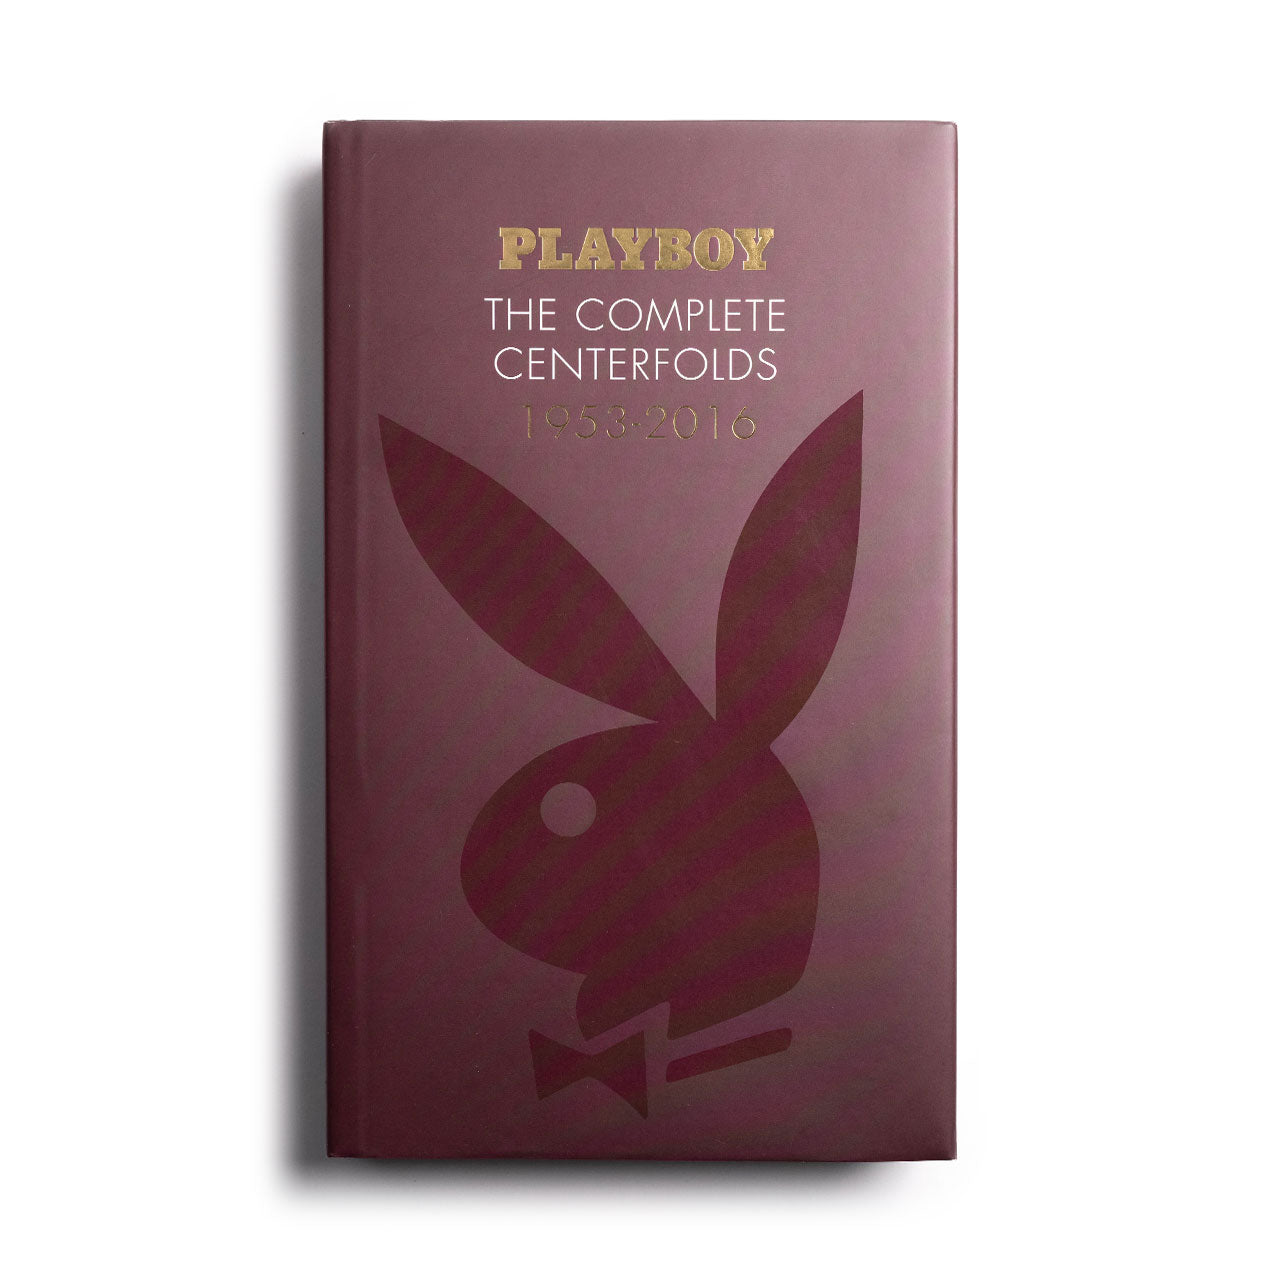 Playboy: The Complete Centerfolds